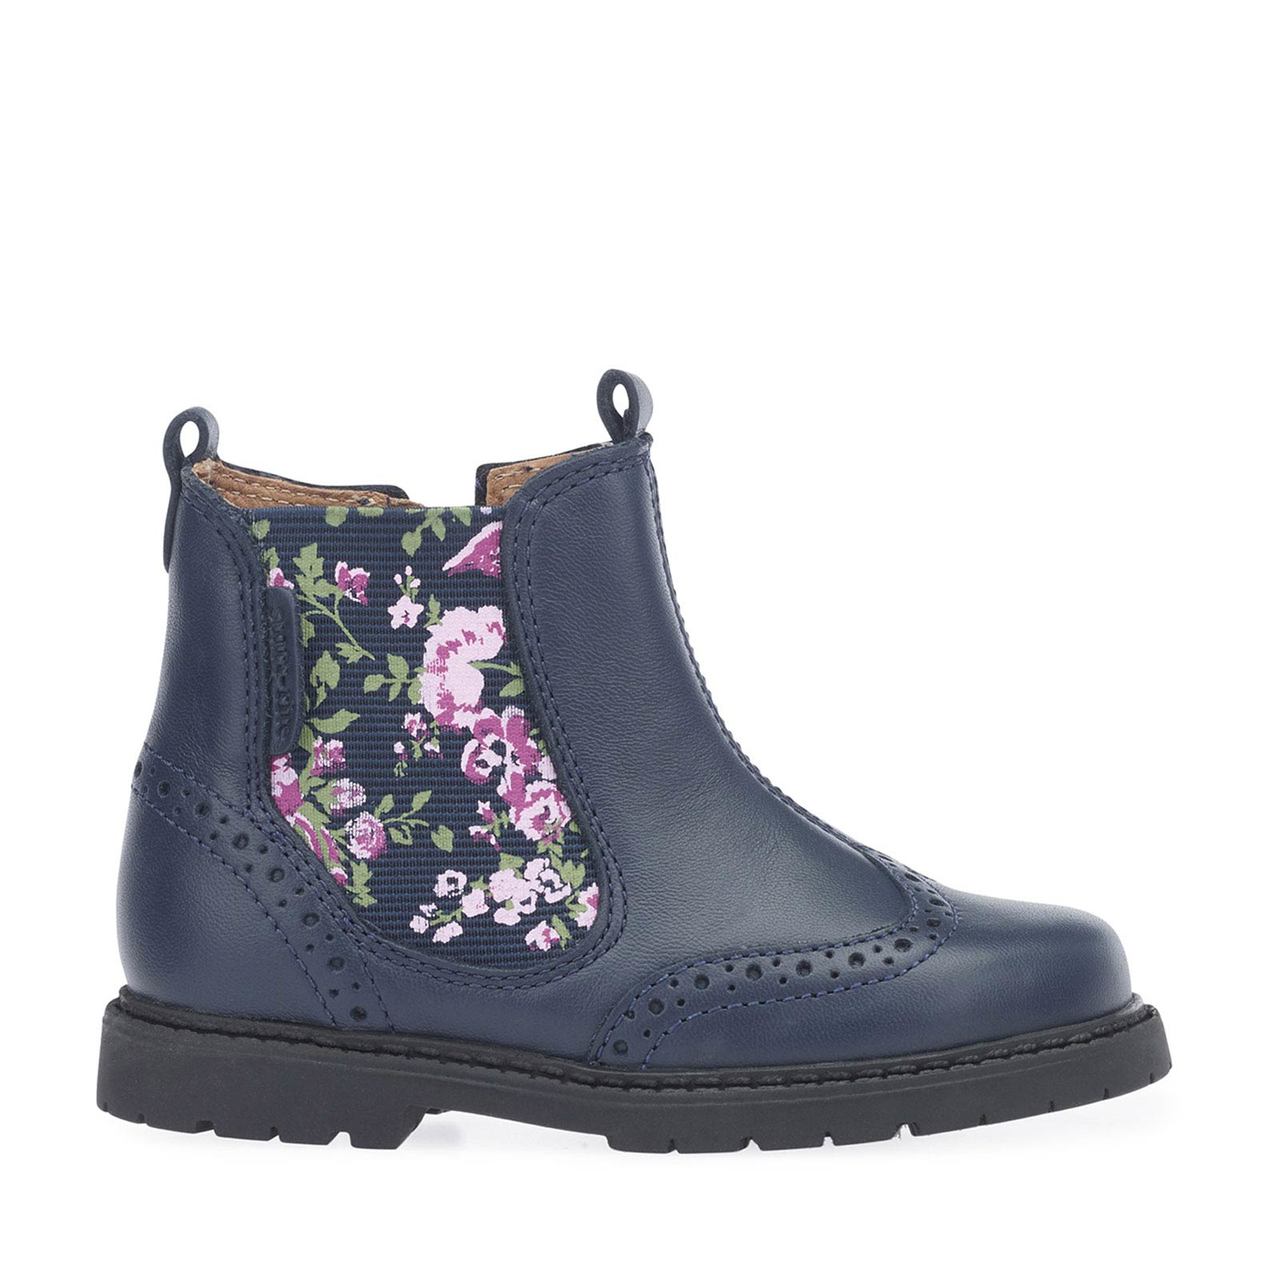 Startrite Girls Navy Floral Chelsea Boot Footwear UK10 KIDS / Navy,UK11 KIDS / Navy,UK12 KIDS / Navy,UK13 KIDS / Navy,UK1 KIDS / Navy,UK2 KIDS / Navy,UK3 KIDS / Navy